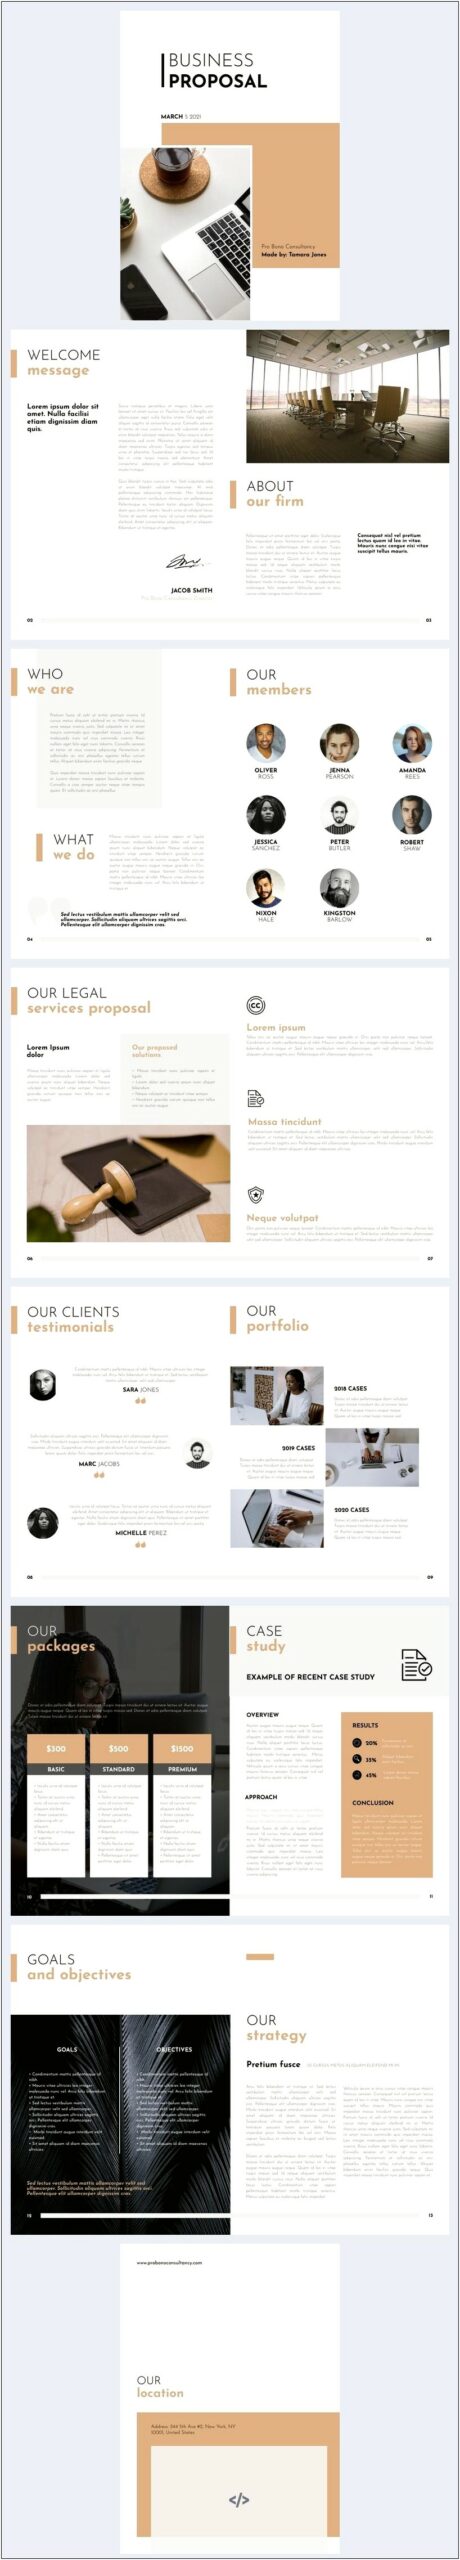 Free Business Proposal Template Download Pdf